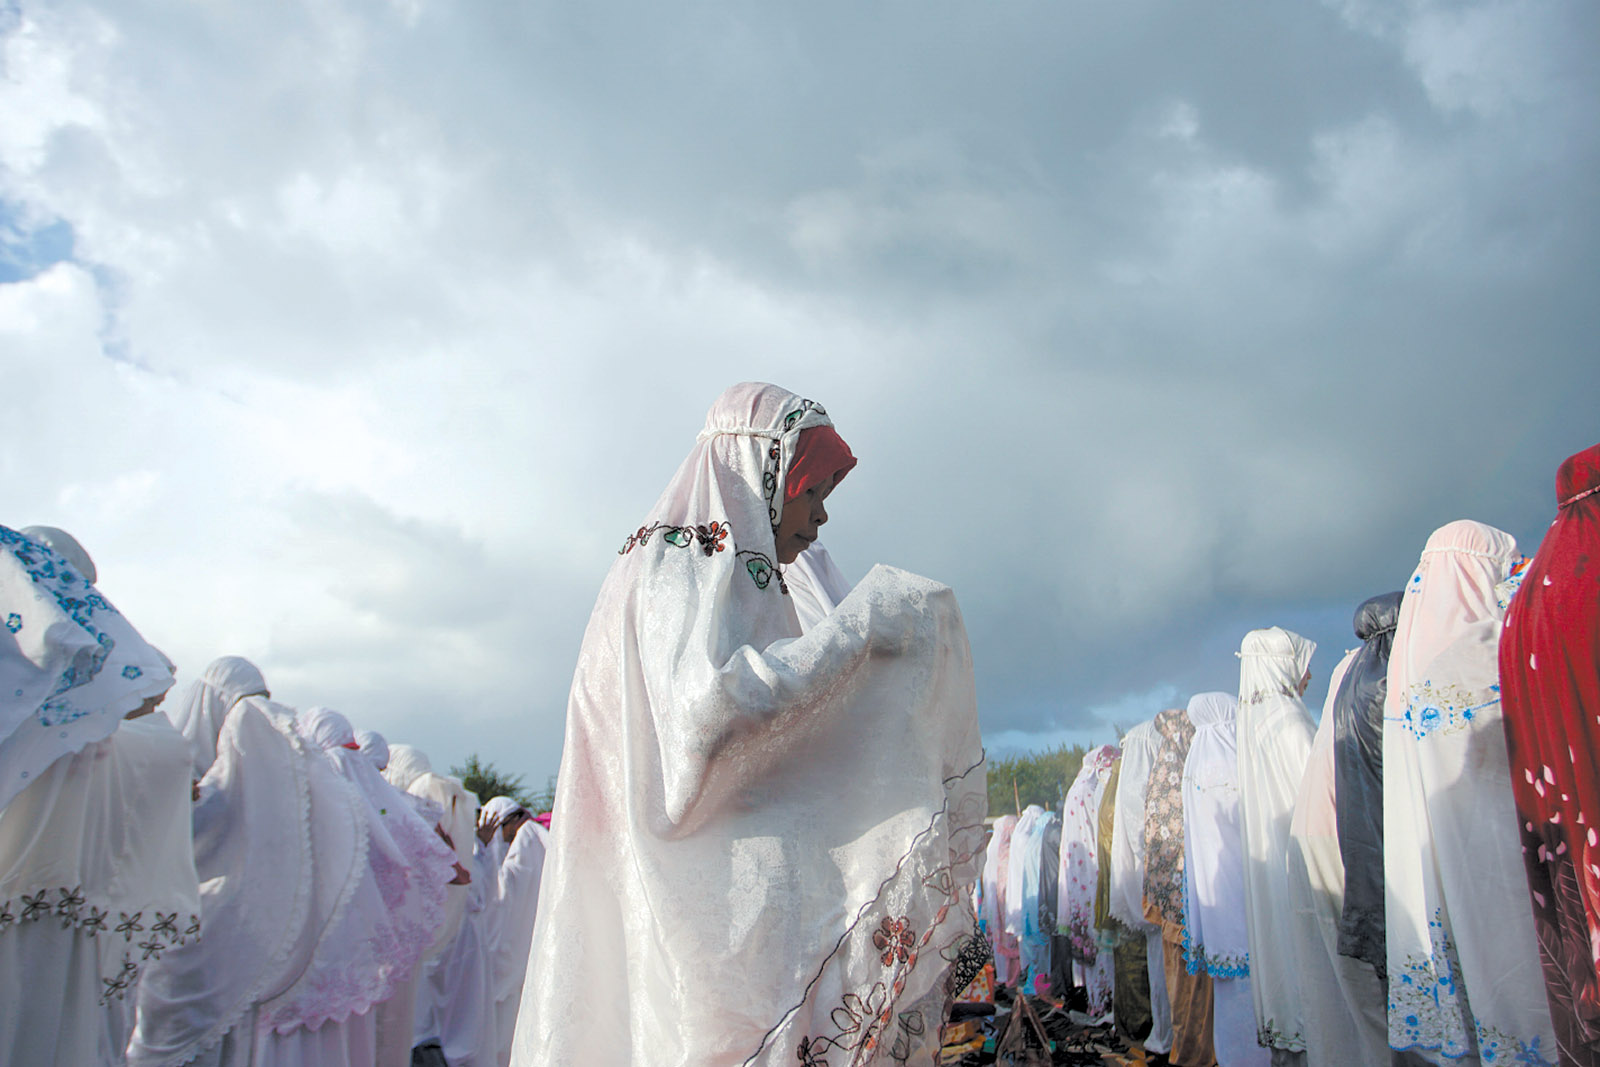 Indonesian Muslims at morning prayers in Yogyakarta during Eid al-Adha, the festival marking the end of the annual Hajj pilgrimage to the Saudi holy city of Mecca, September 2016